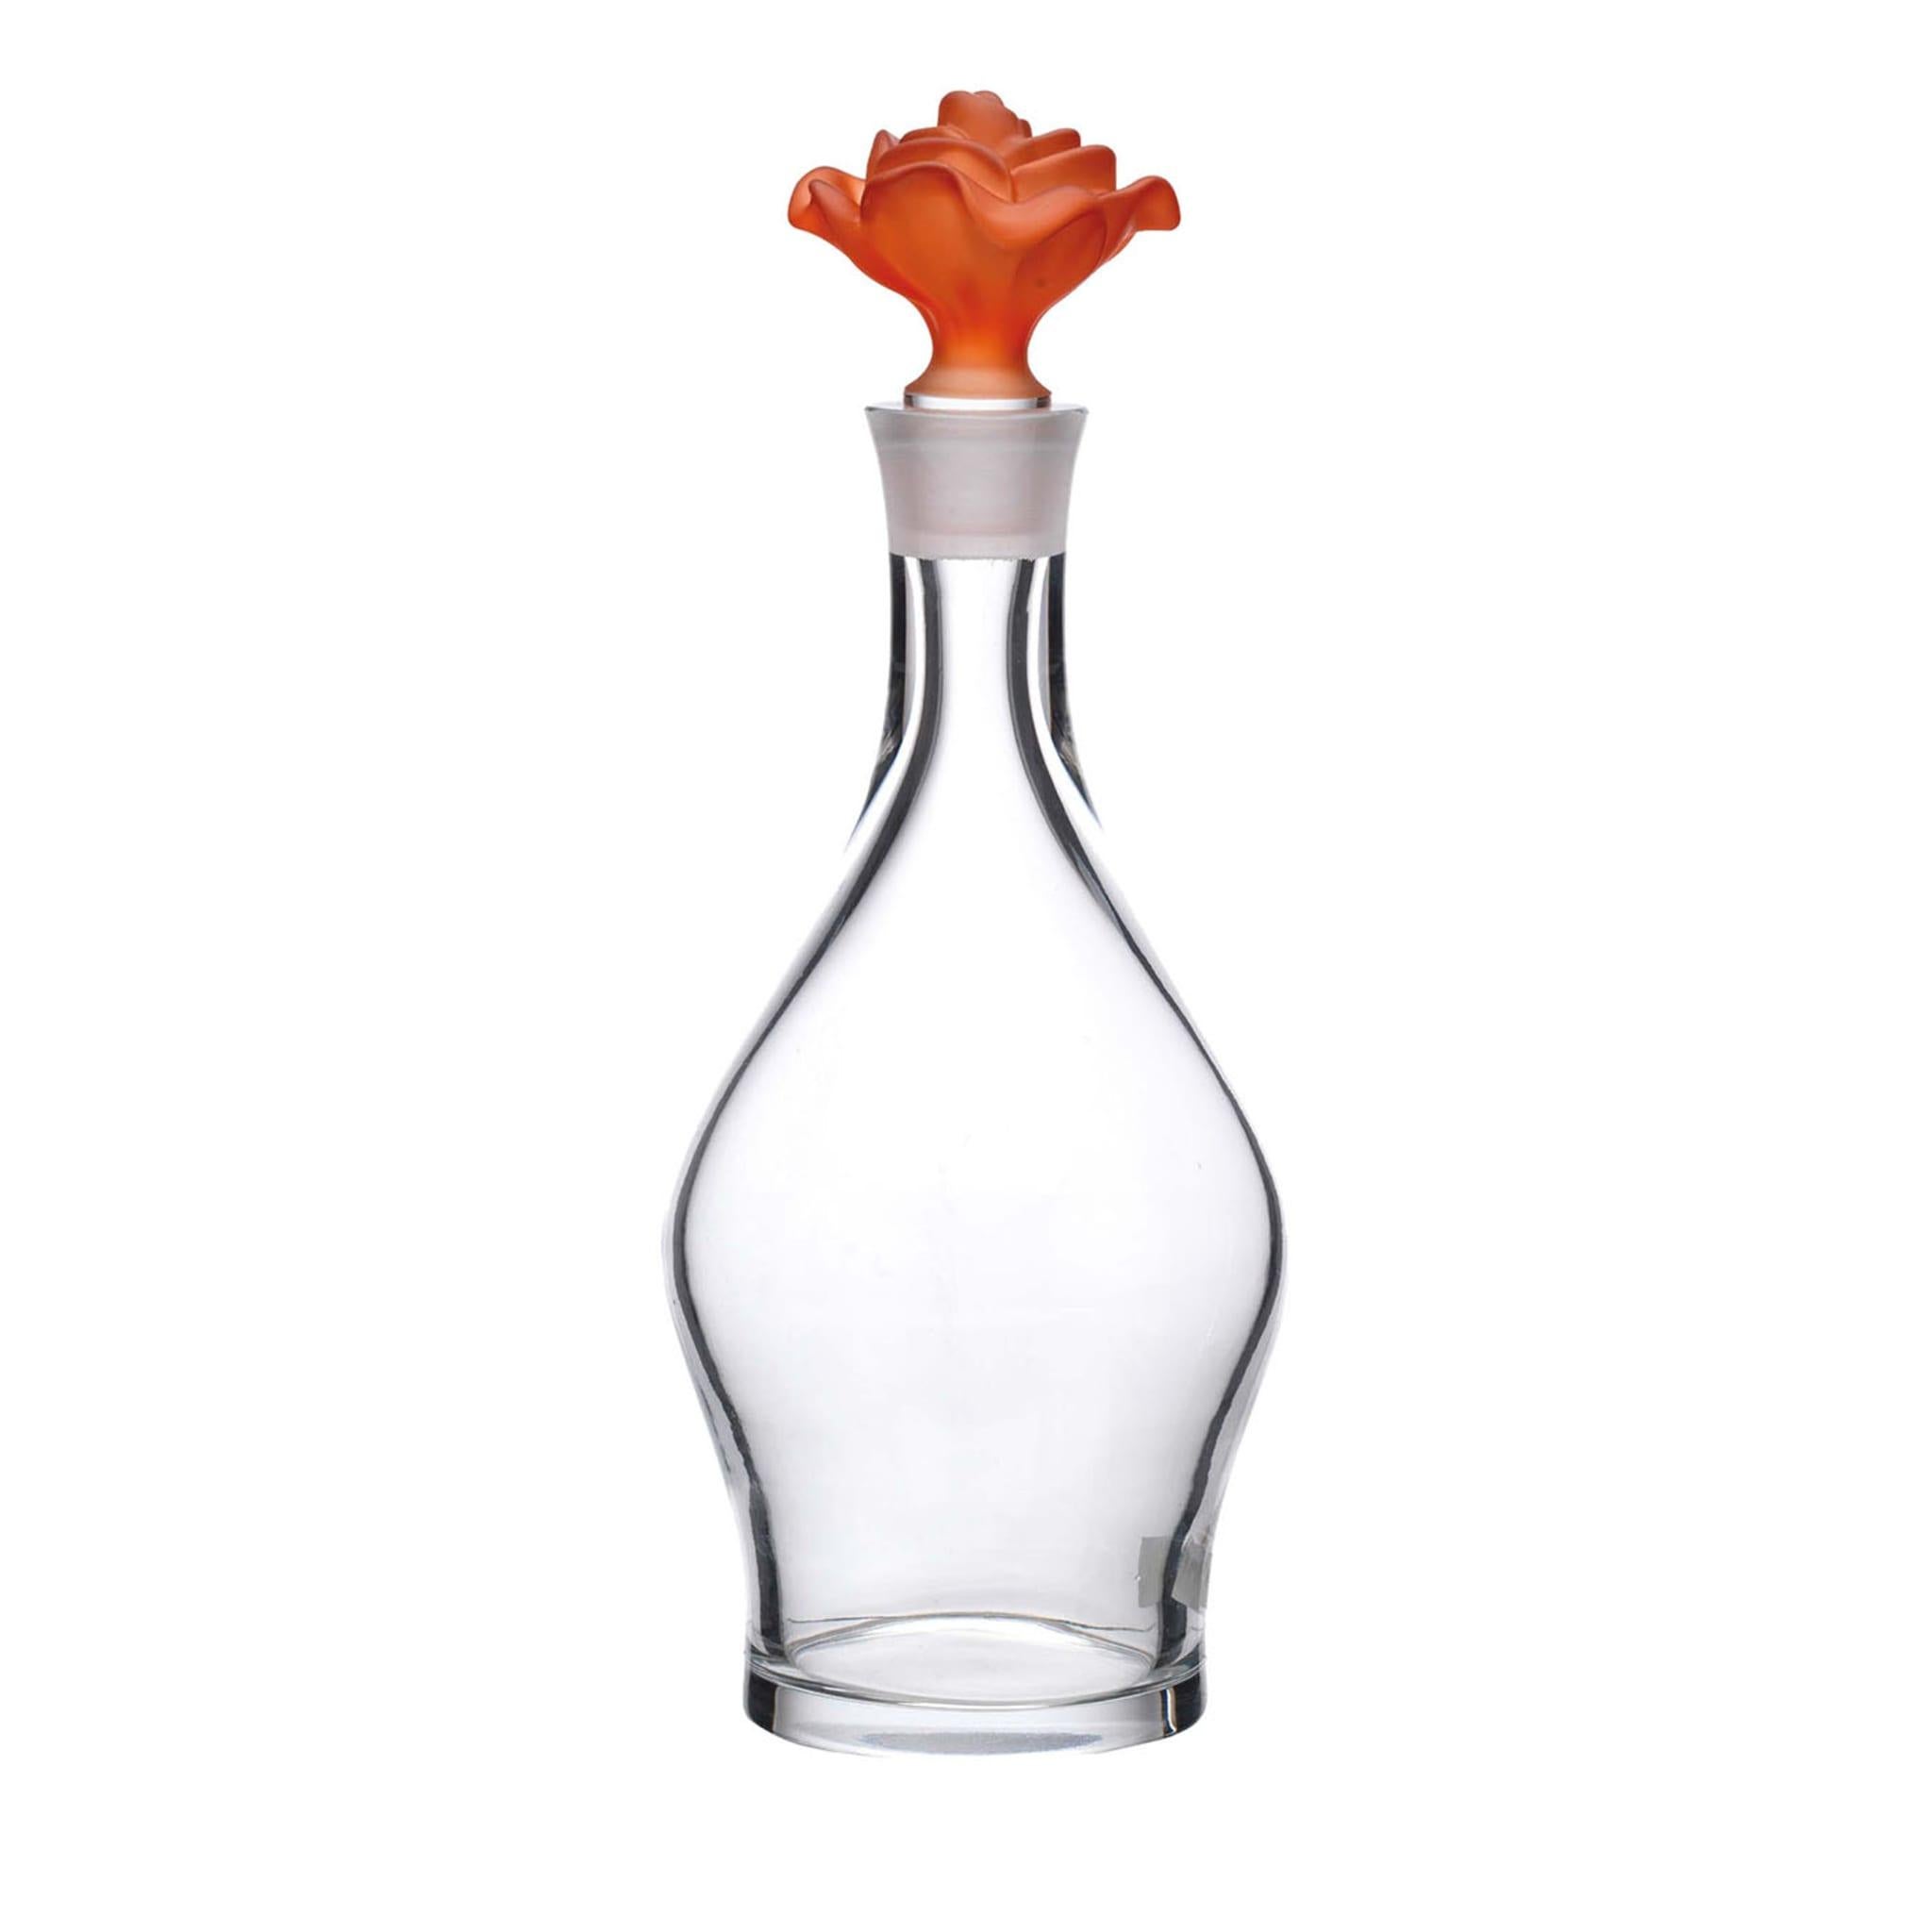 Mouth-blown from fine crystal, this transparent bottle from the Milano Collection stands out for its unmistakable femininity. The sensual curves of its silhouette stand in impeccable harmony with the opaline orange lid in the shape of a blossoming